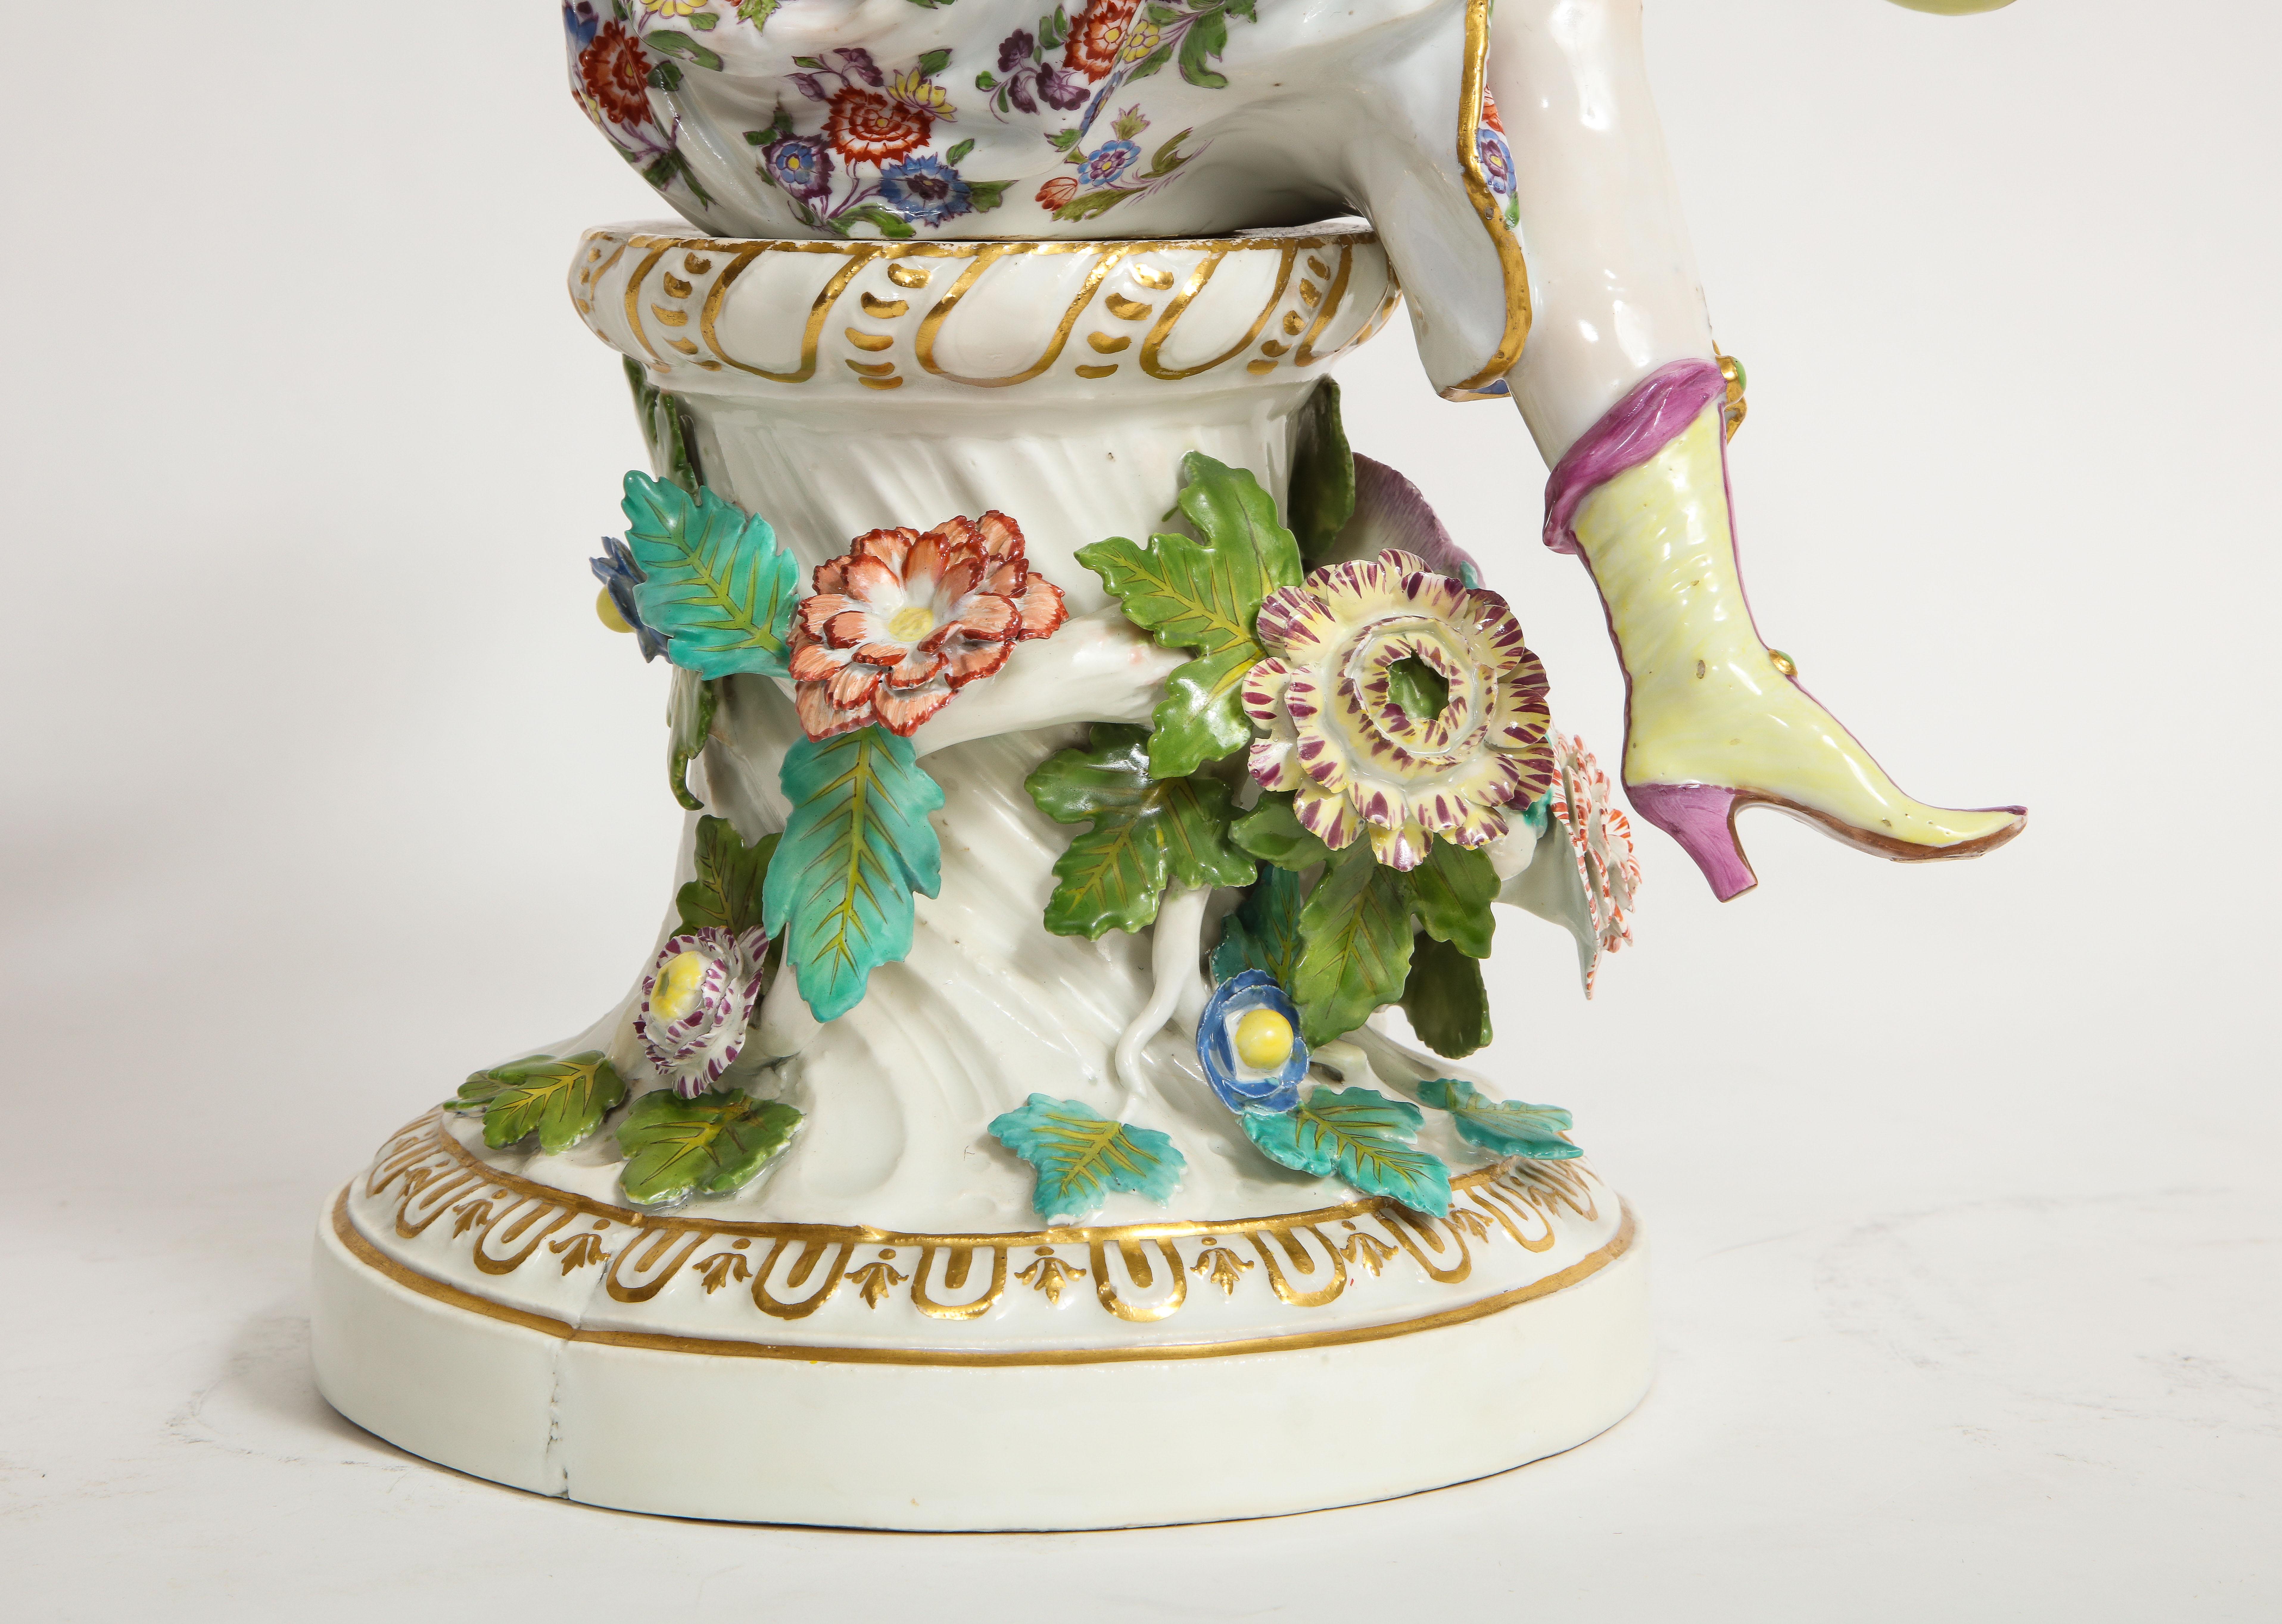 Rare 18th Century Meissen Porcelain Group of a Thalia with a Harlequin Child For Sale 5